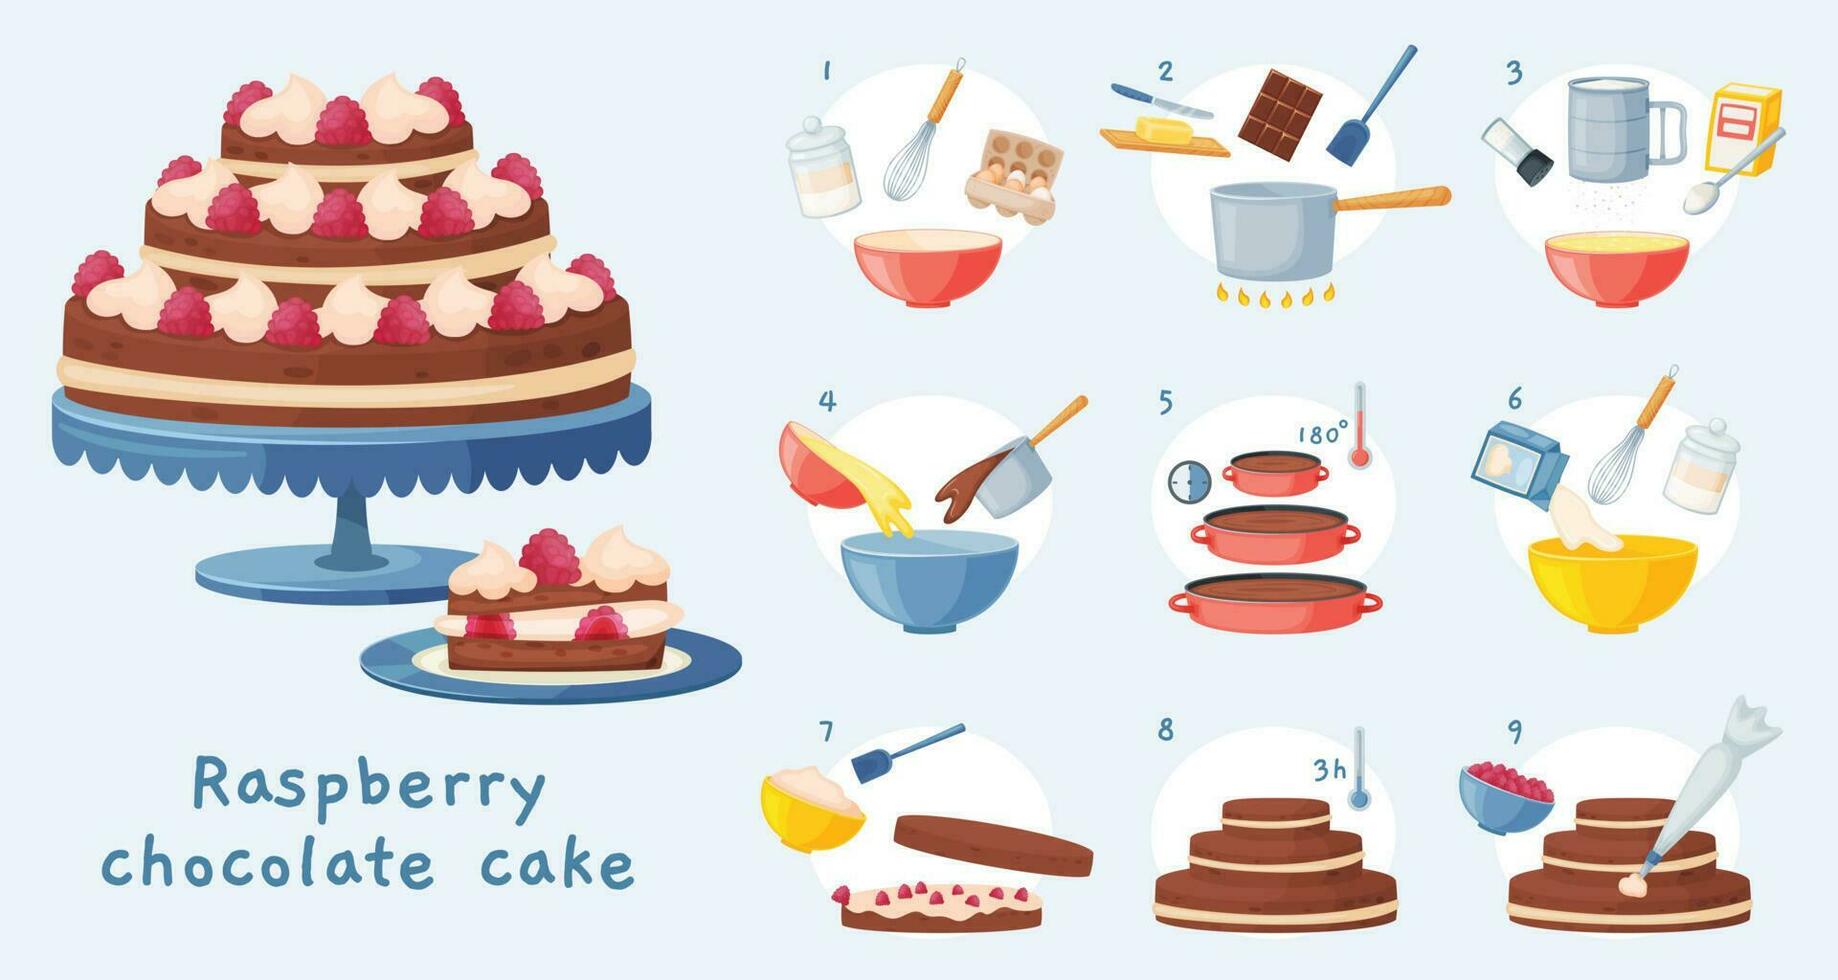 Cake recipe, baking dessert step by step instruction. Delicious birthday chocolate cake with cream, sweet bakery preparation vector illustration